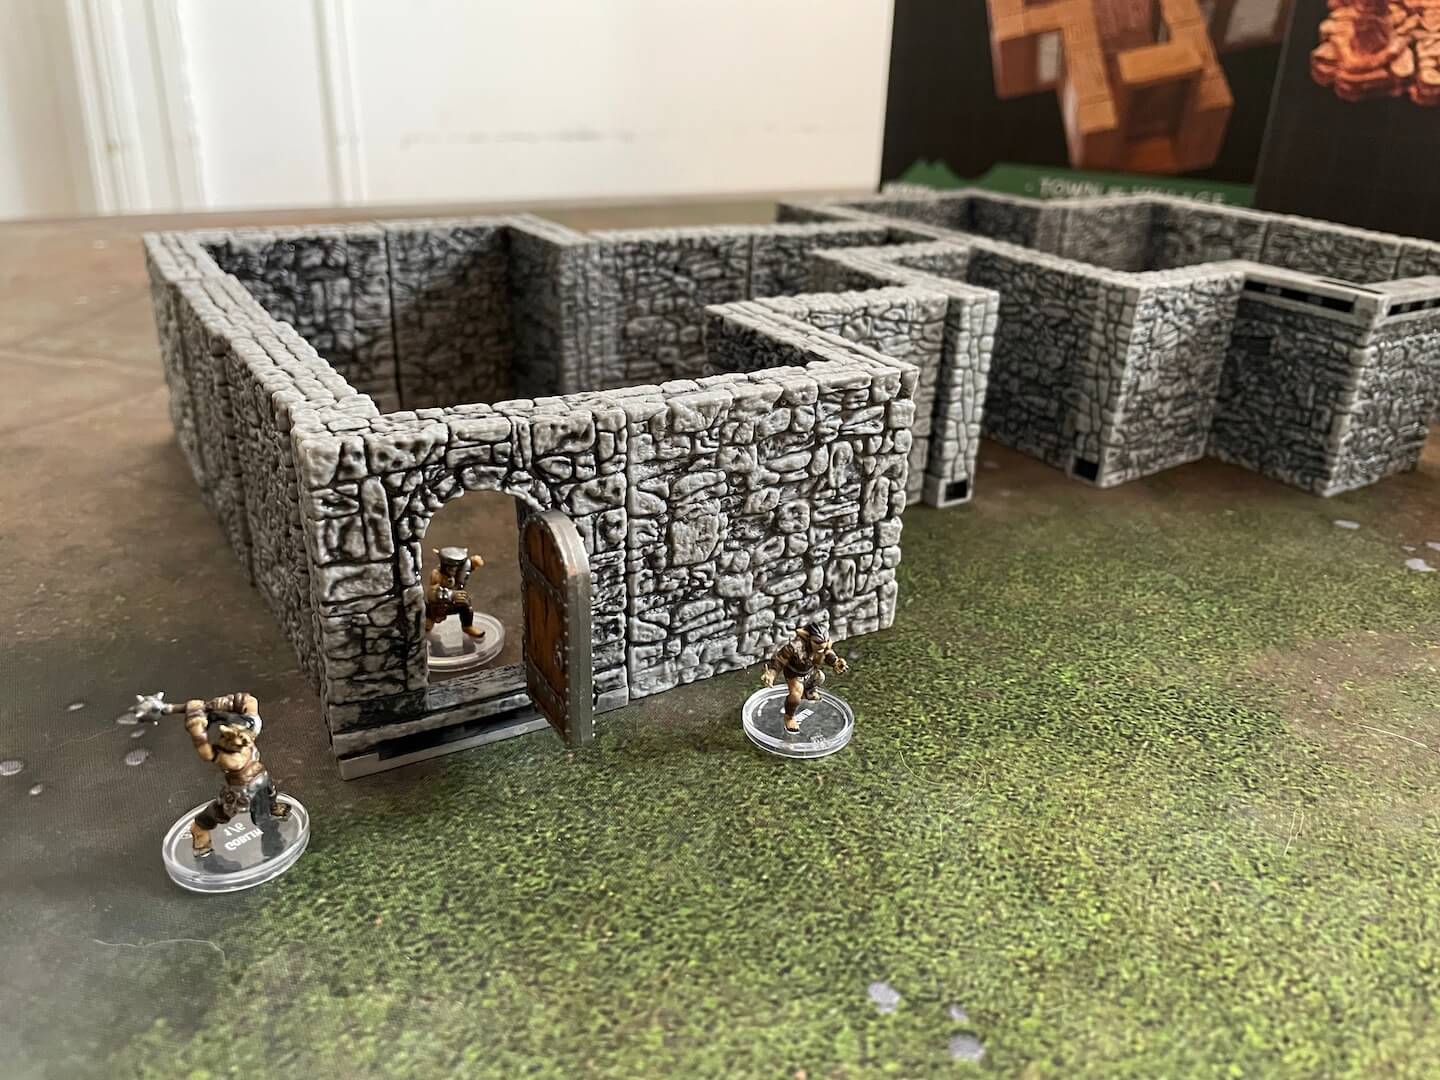 Goblins stalk the halls of this ruined castle made from WizKids WarLock Dungeon Tiles.